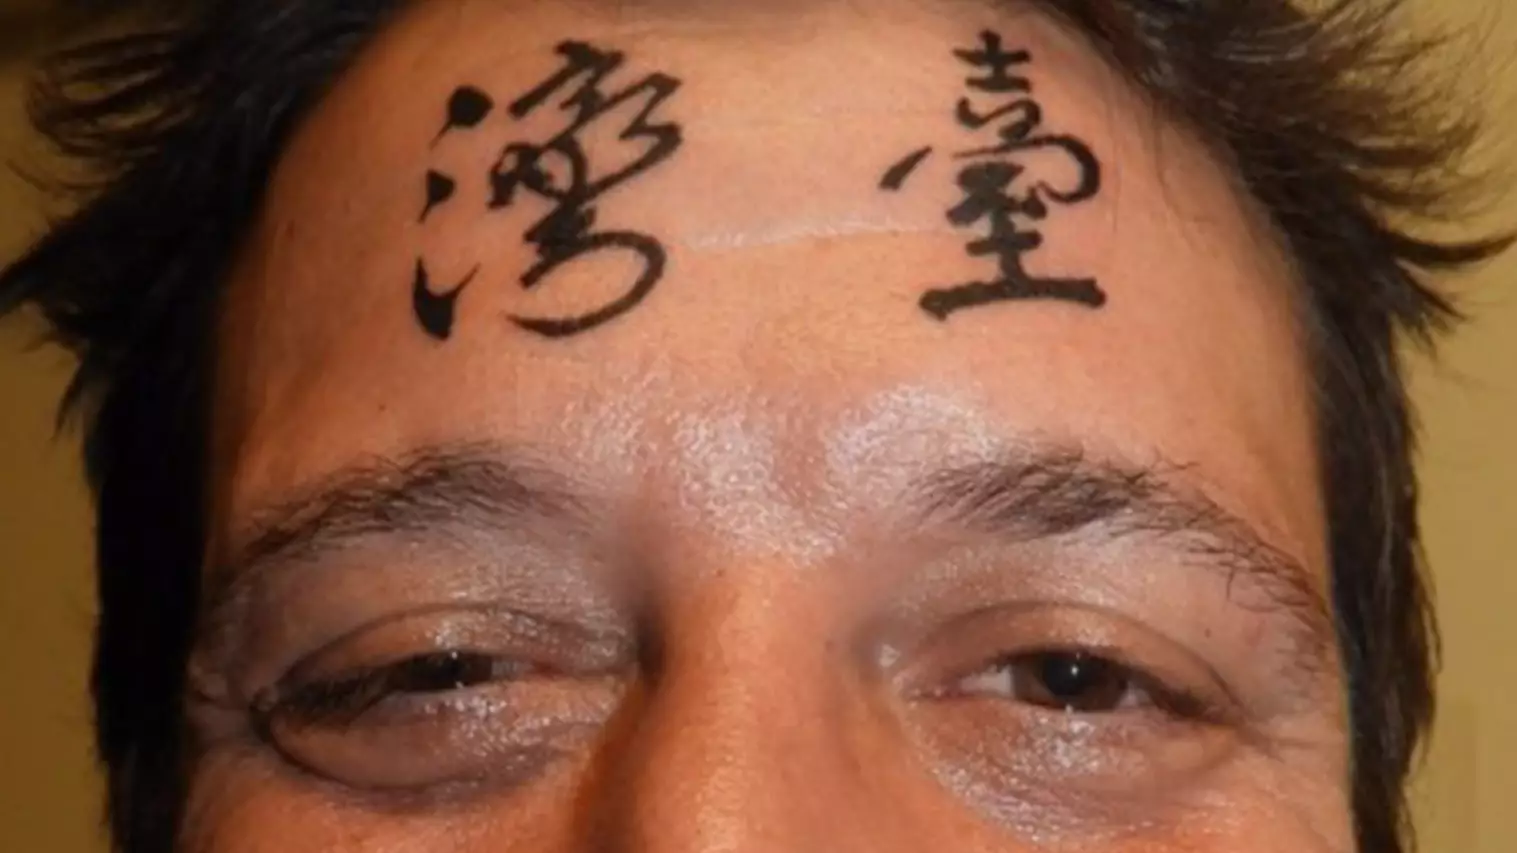 Drunk Brit Gets Chinese ‘Taiwan’ Tattoo… On His Forehead